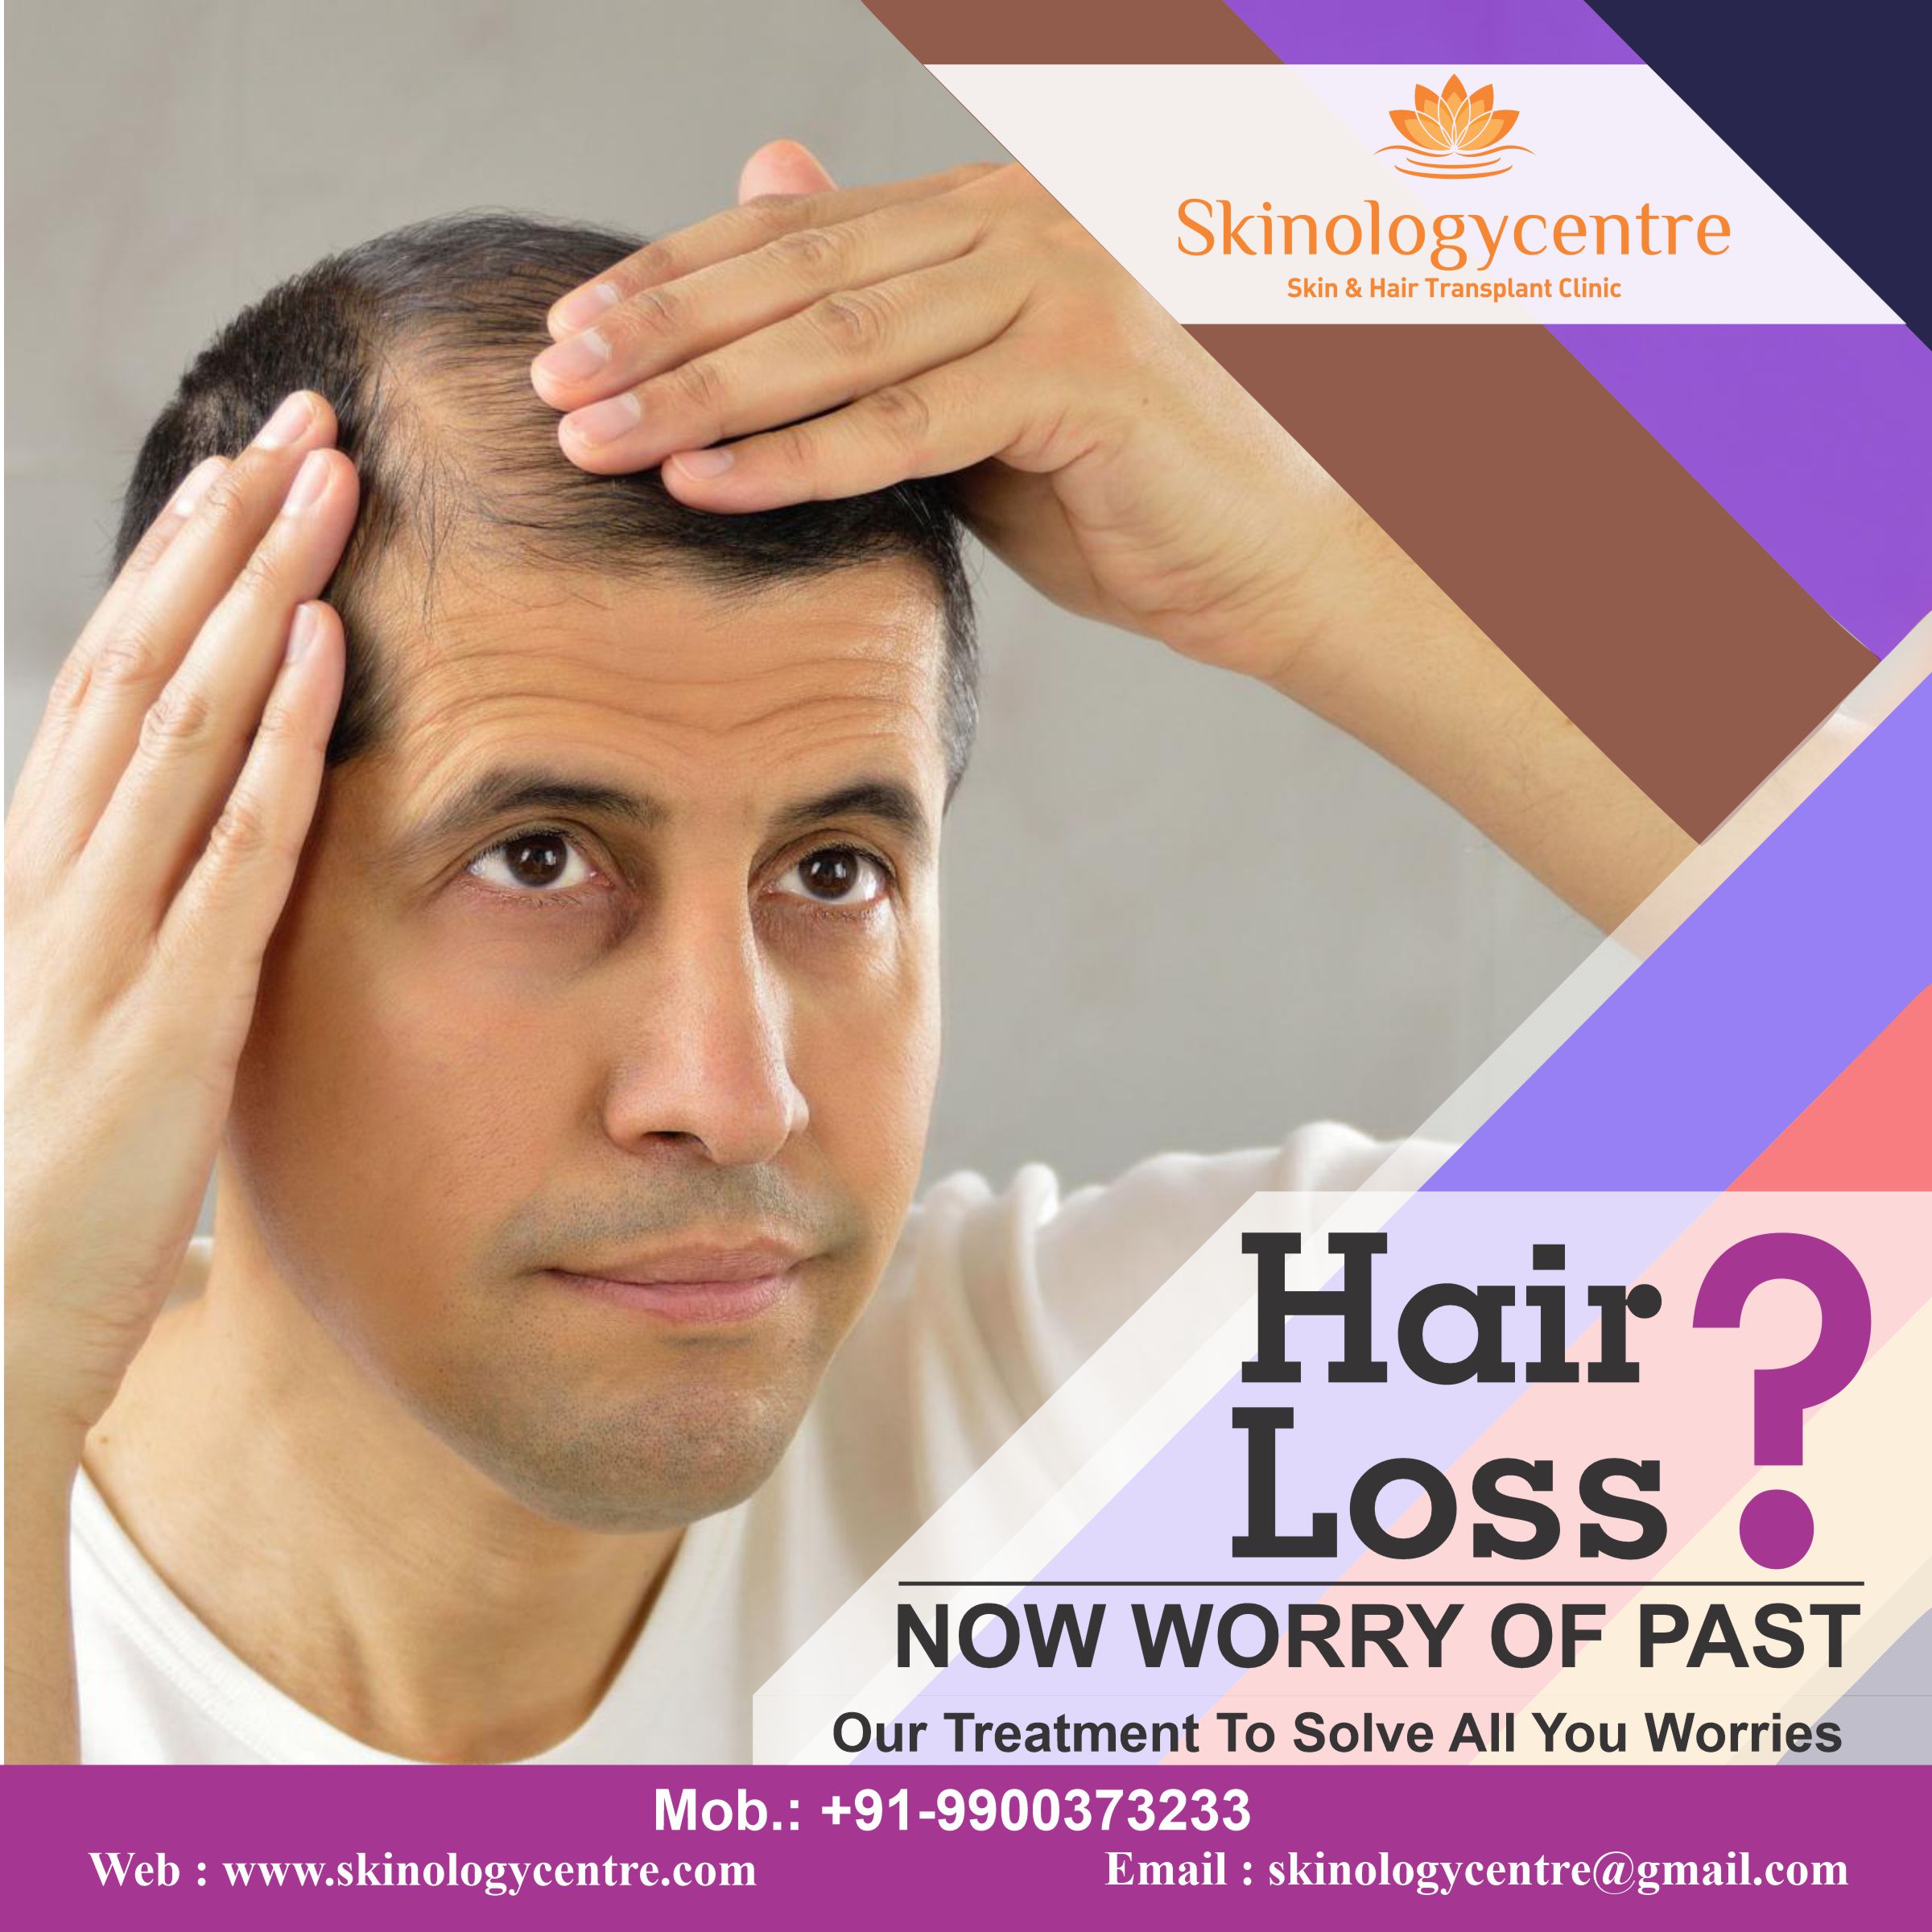 Hair Transplant Cost in Bangalore | FUE Hair Transplant @ Rs.29,999/